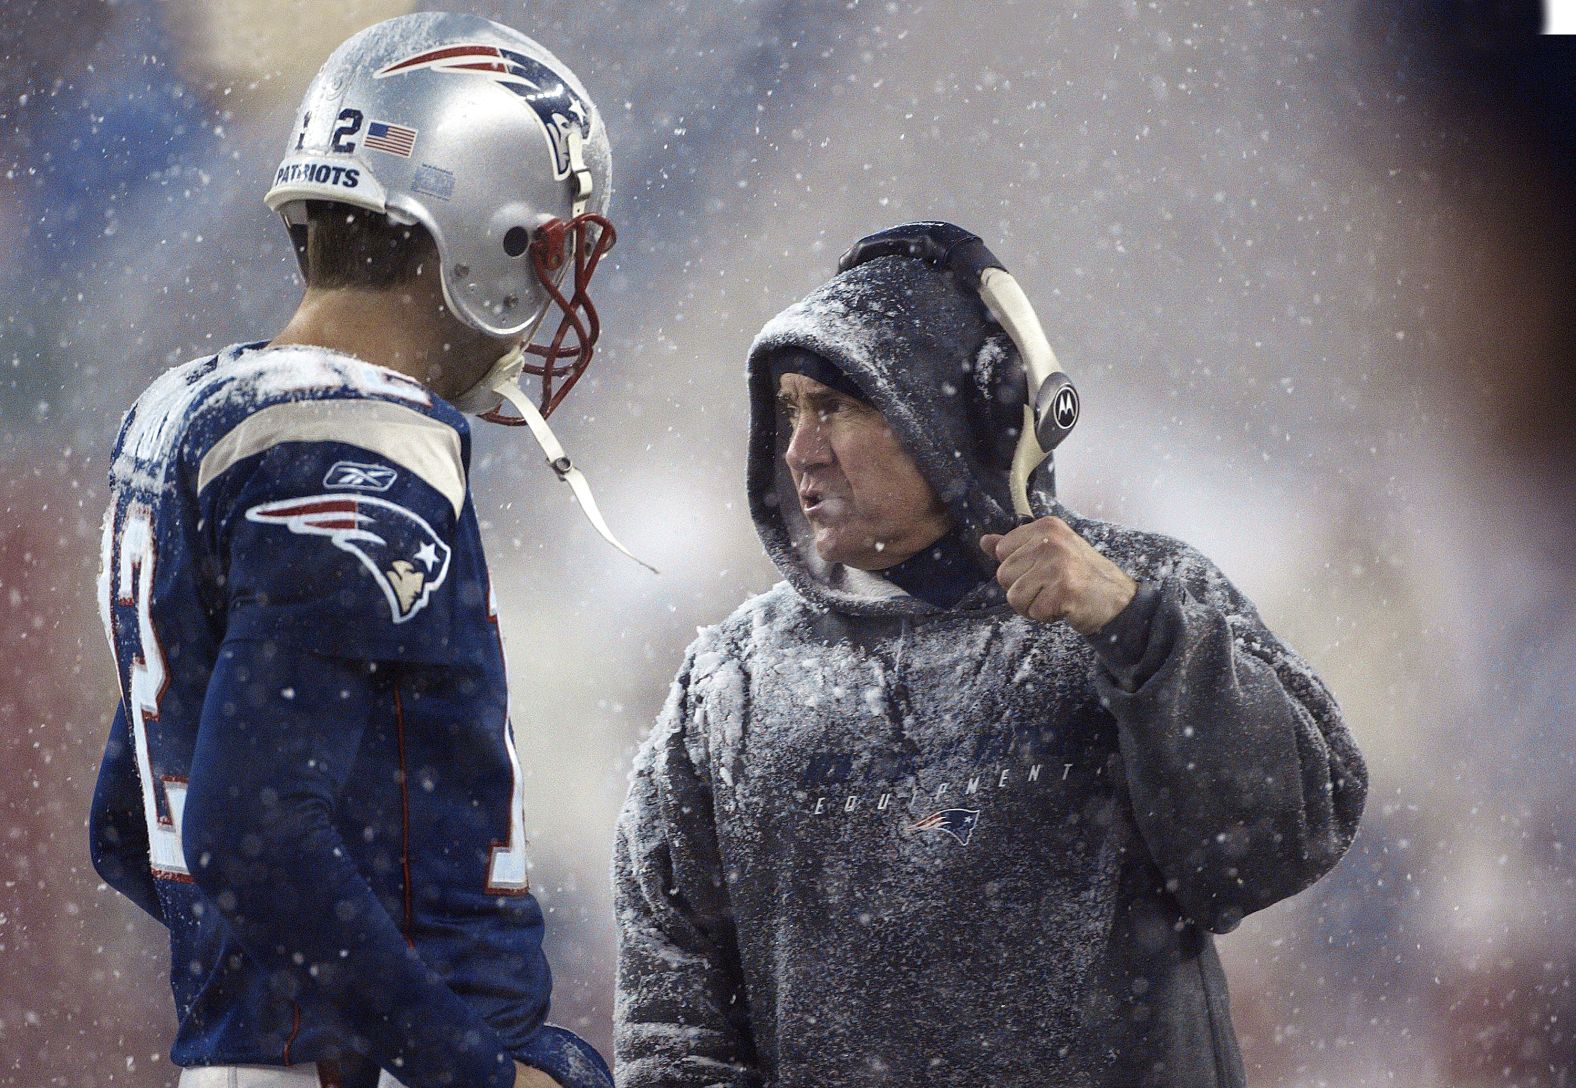 Quarterback Tom Brady listens to Belichick during a snowy game against the Jacksonville Jaguars in 2003. The two helped transform the Patriots into a 21st-century juggernaut.